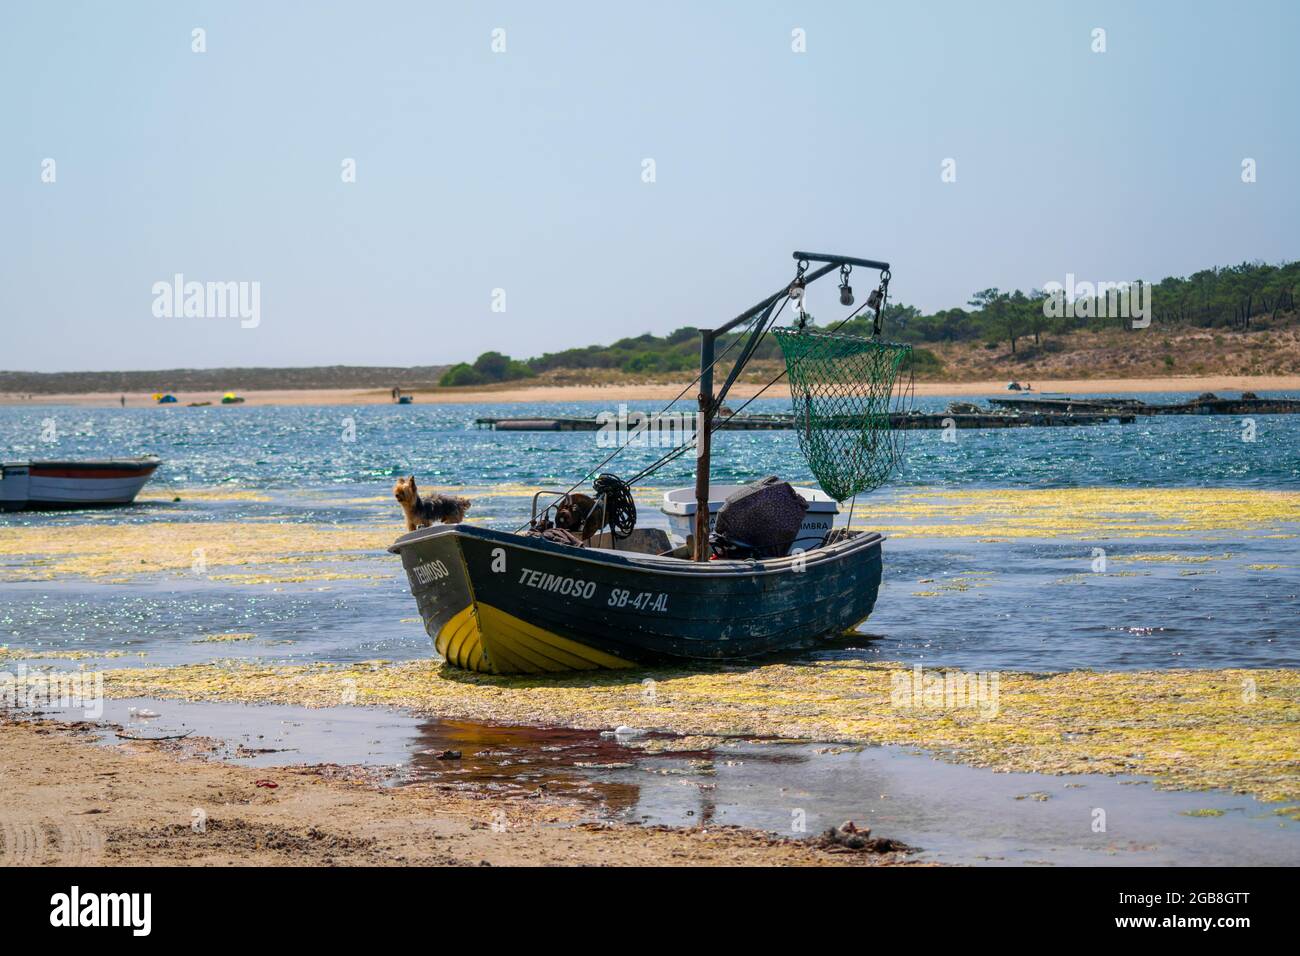 Dogs on working activities, small dog in a fisherman boat, blue and yellow boat. Loyal dog comanding fisherman boat, animal on working activities. Stock Photo